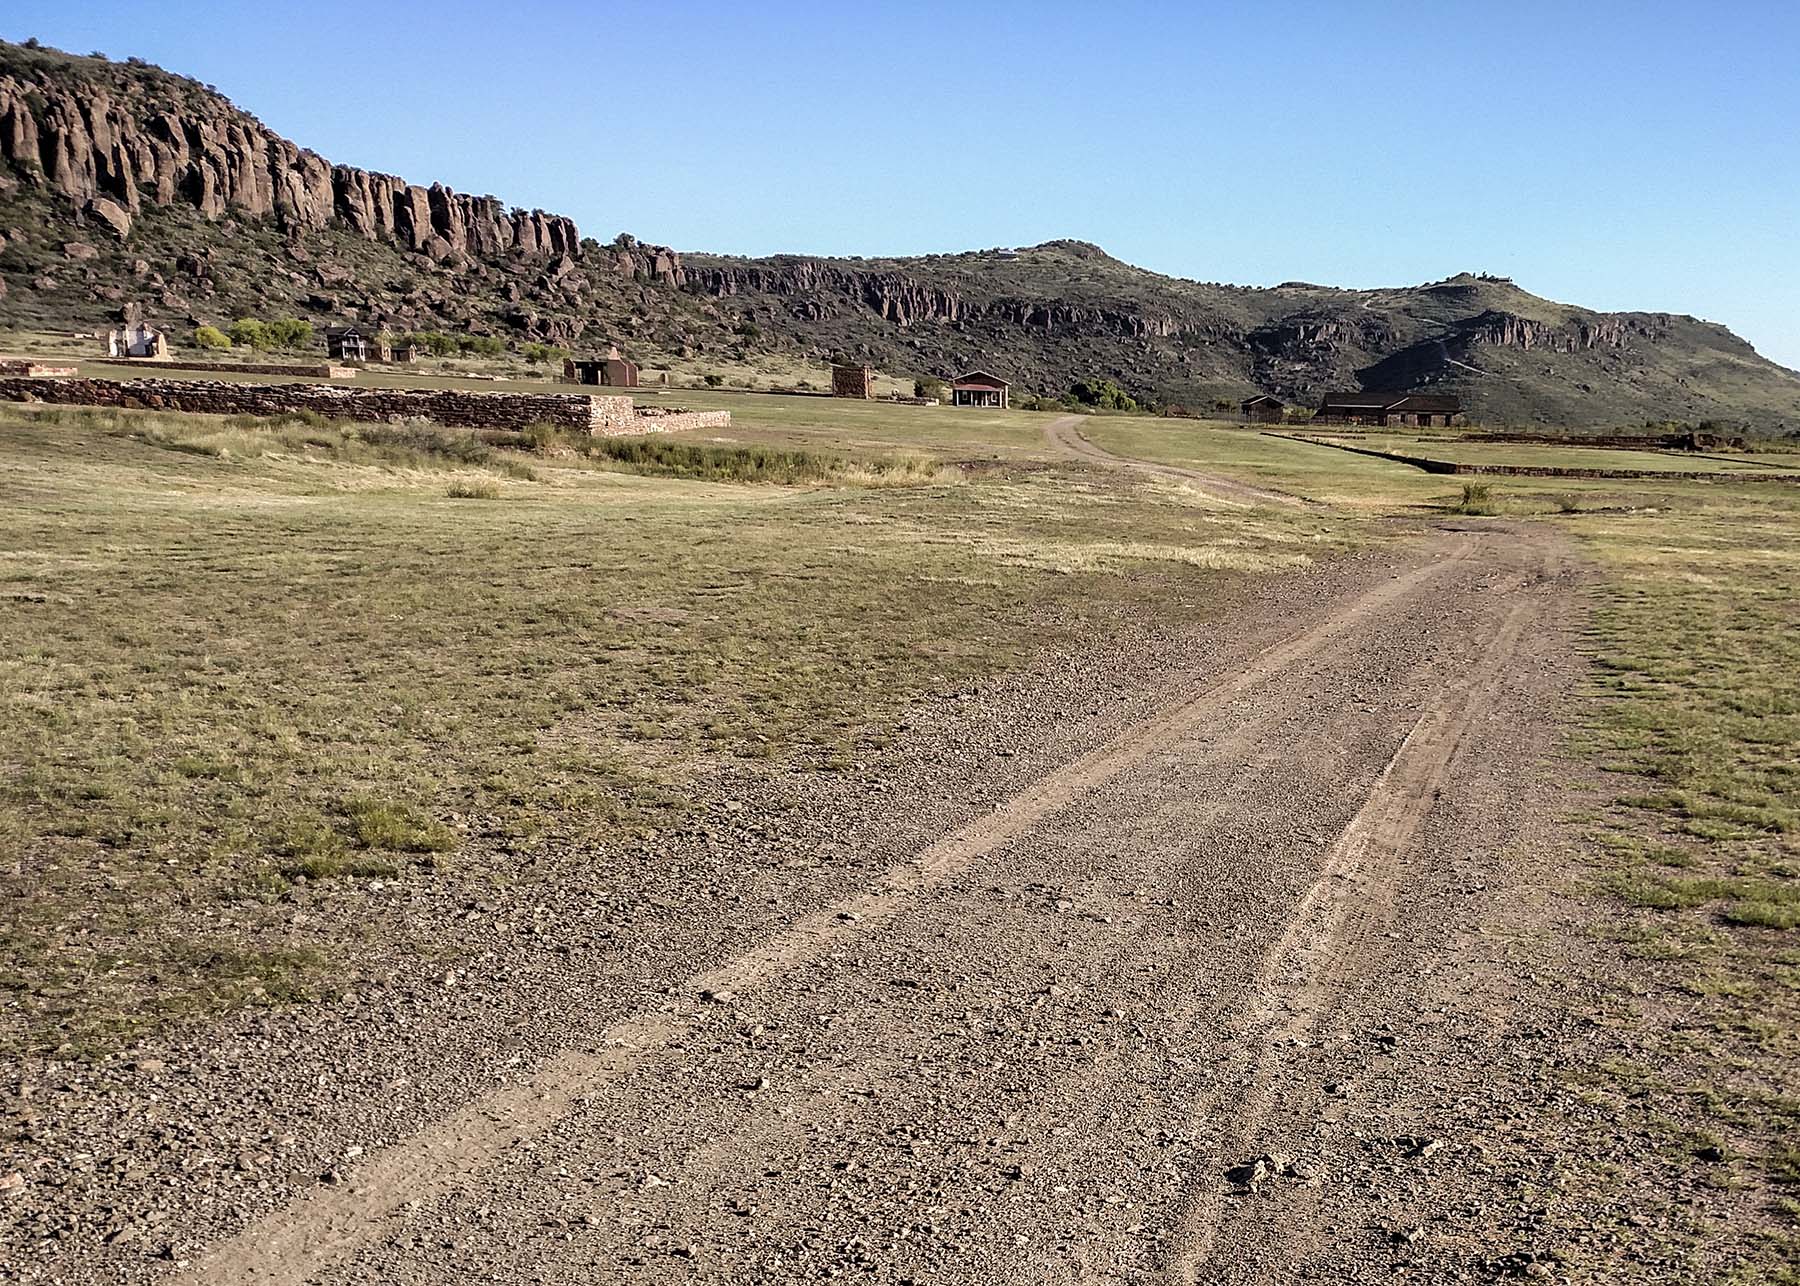 Butterfield Overland Stage road passing through the fort.jpg